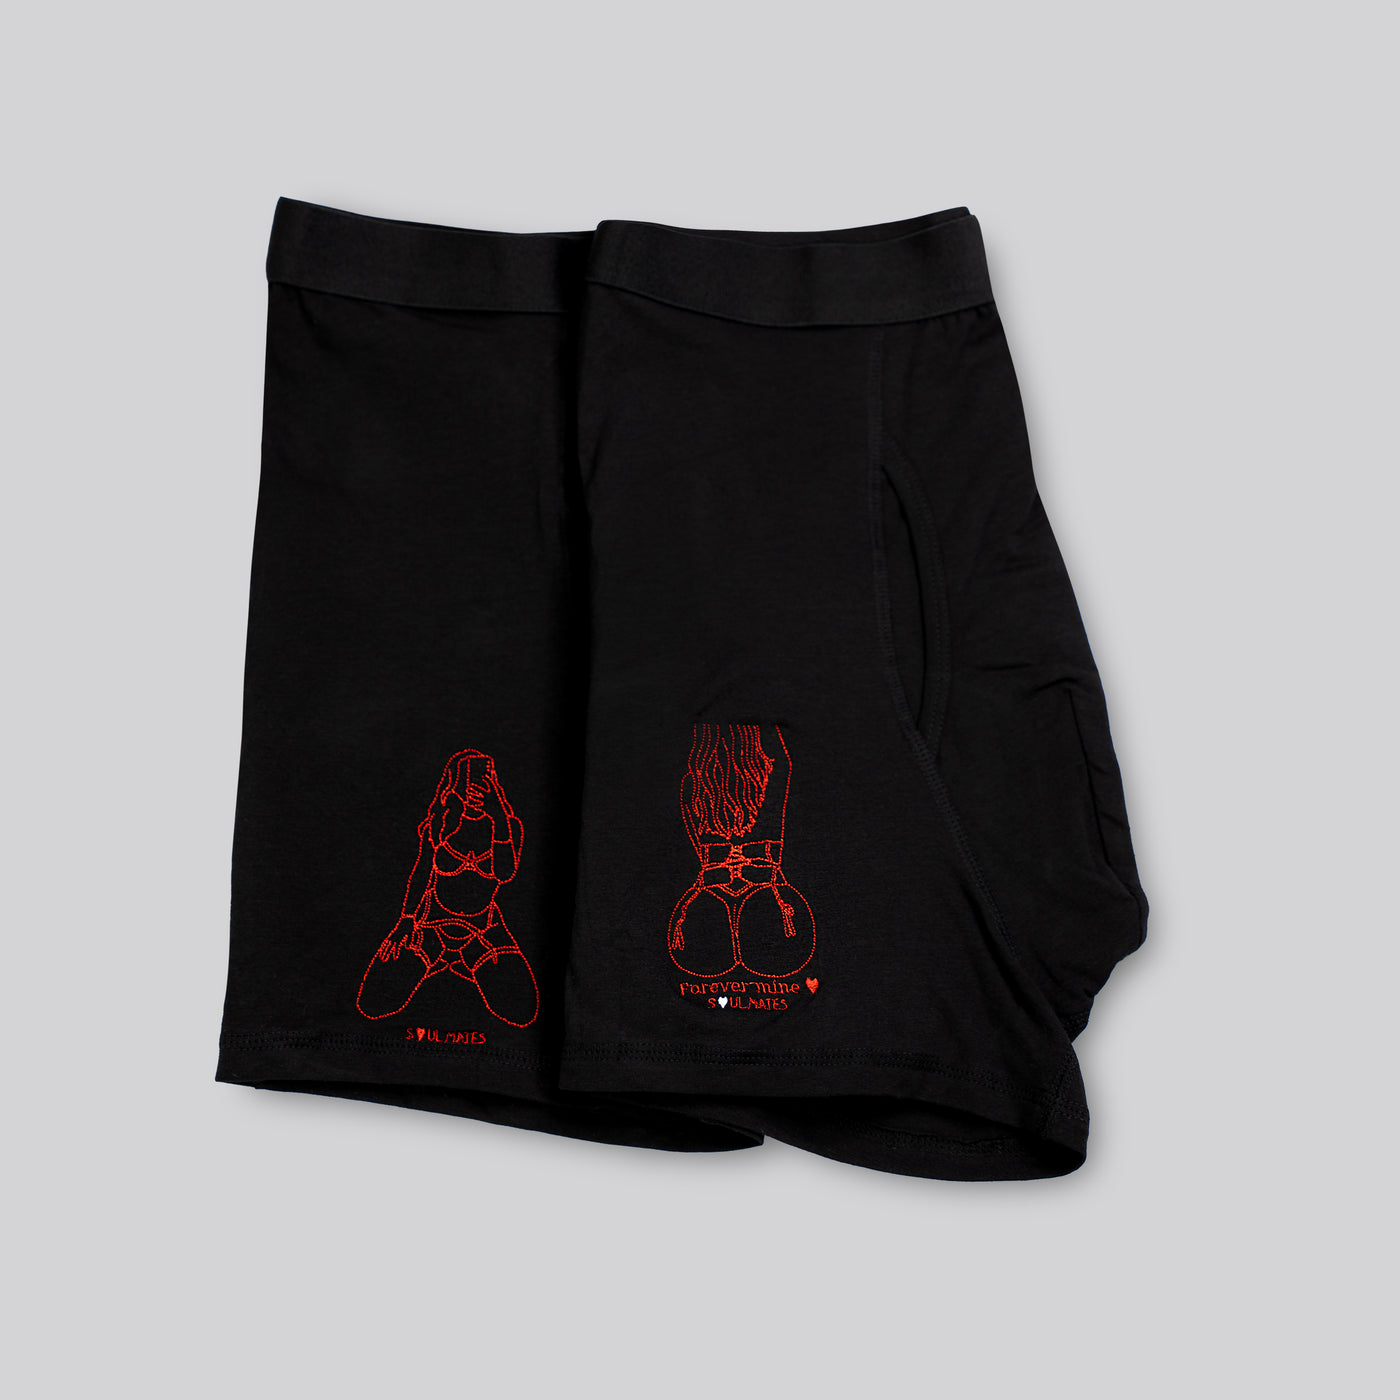 Embroidered Soulmate© Men's Underwear Boxers